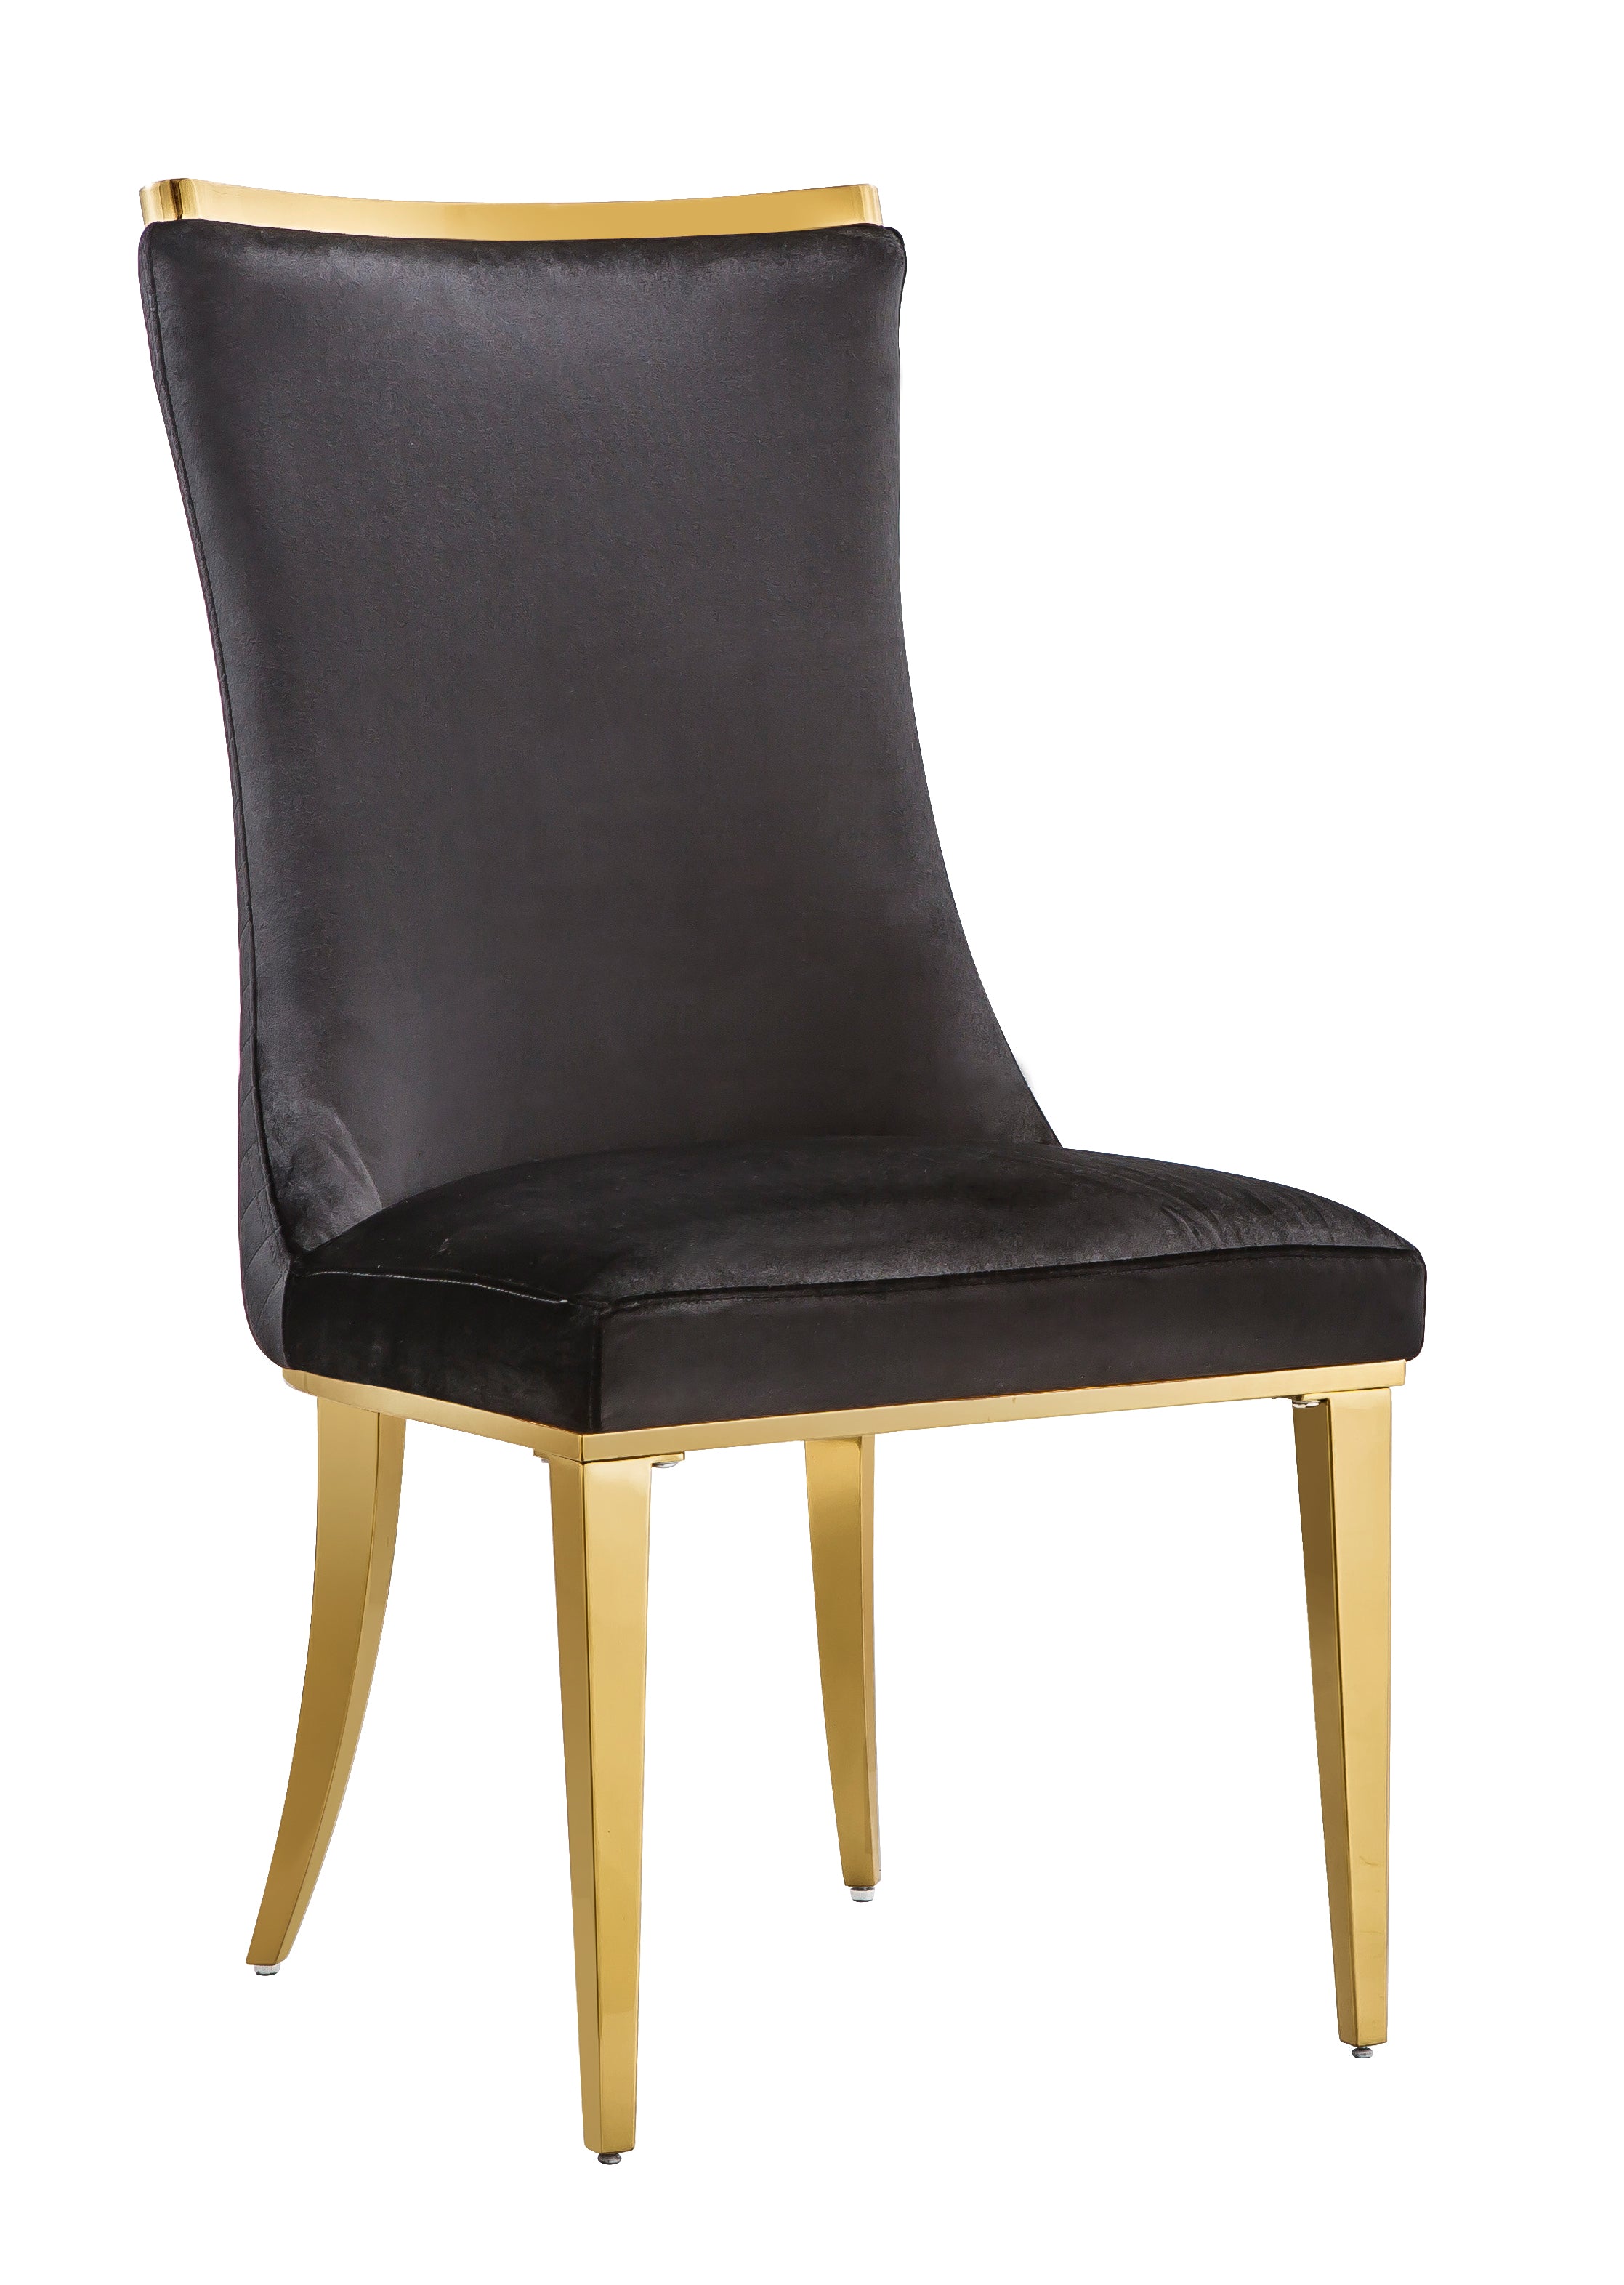 Black Velvet Dining Chairs | Reticulate Texture Back| Gold Metal Legs | C136